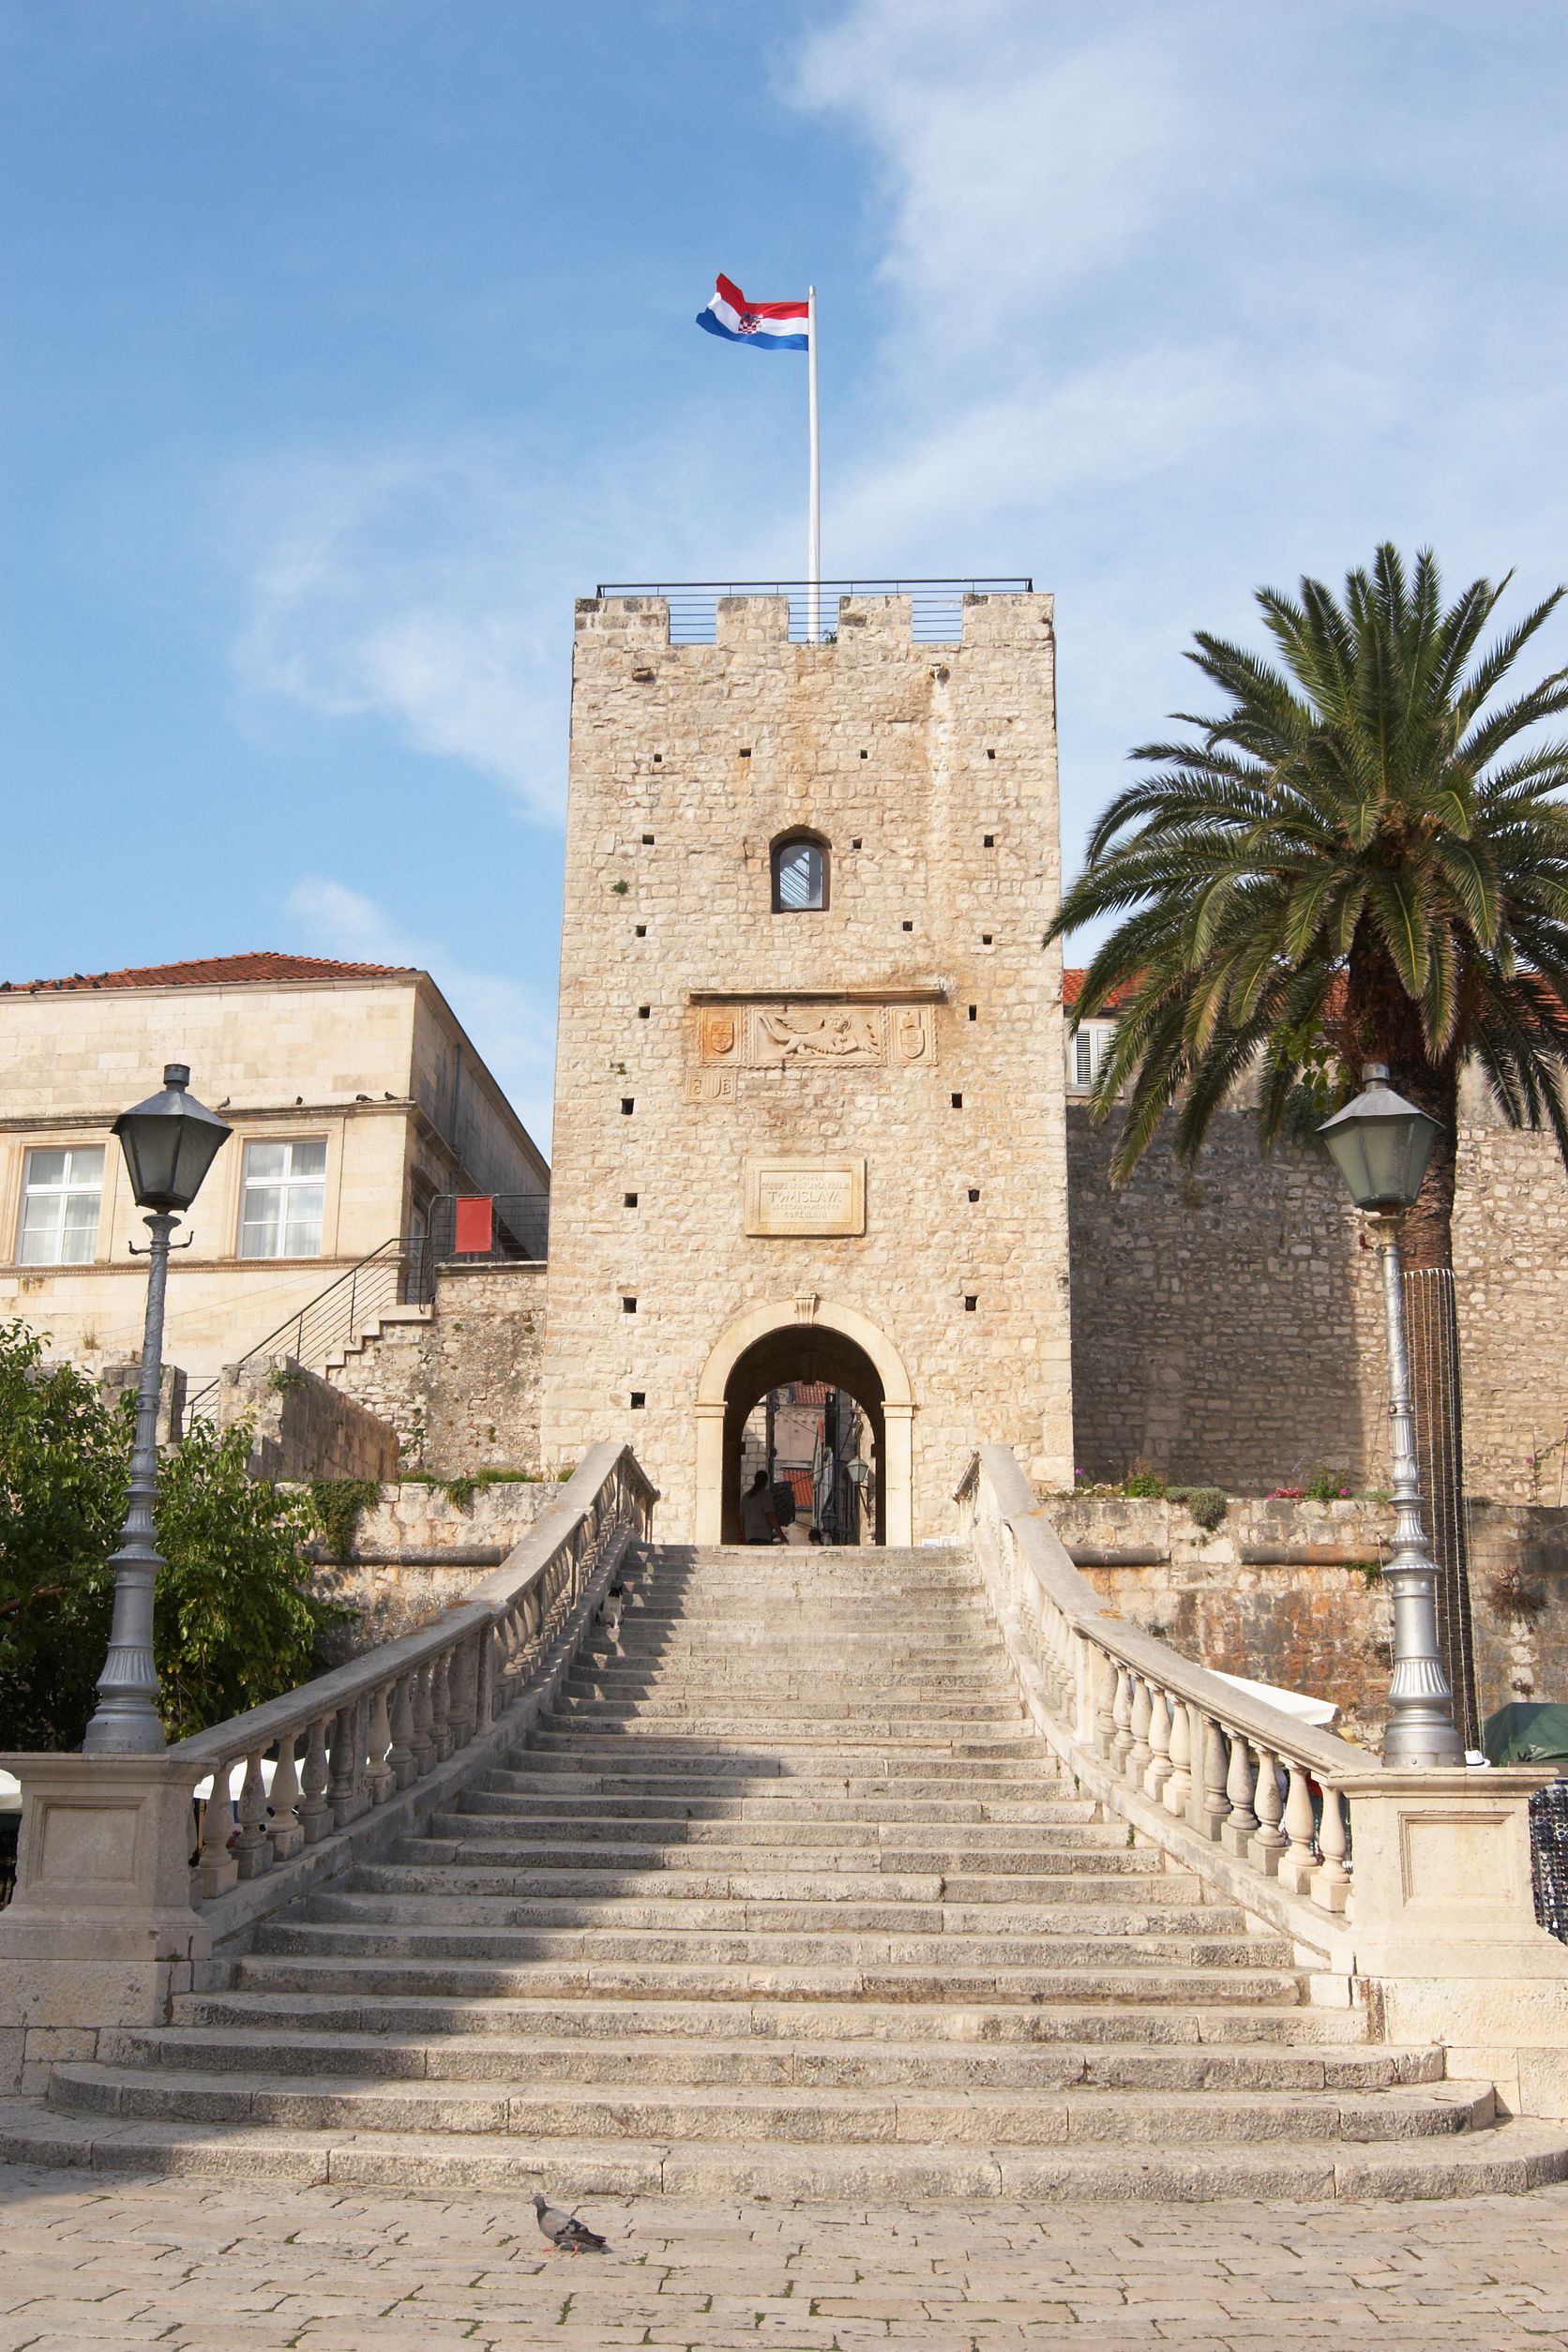 1-Day Ancient City of Ston and Divine Island of Korčula Tour from Dubrovnik